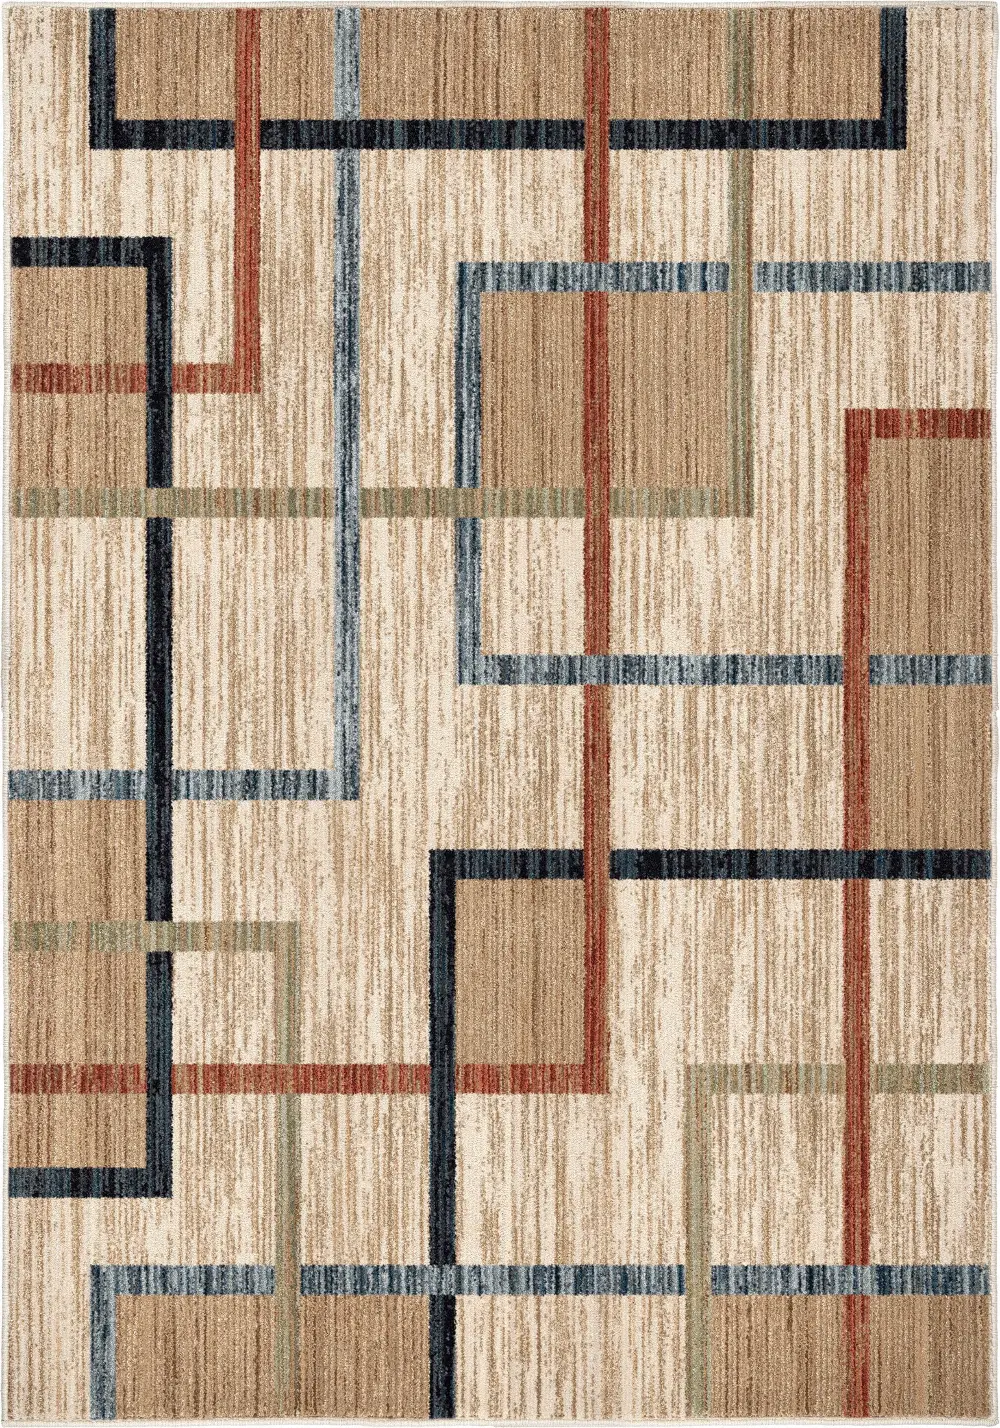 8009/5X8 5 x 8 Medium Traditional Beige, Red, and Blue Rug - Sedona-1